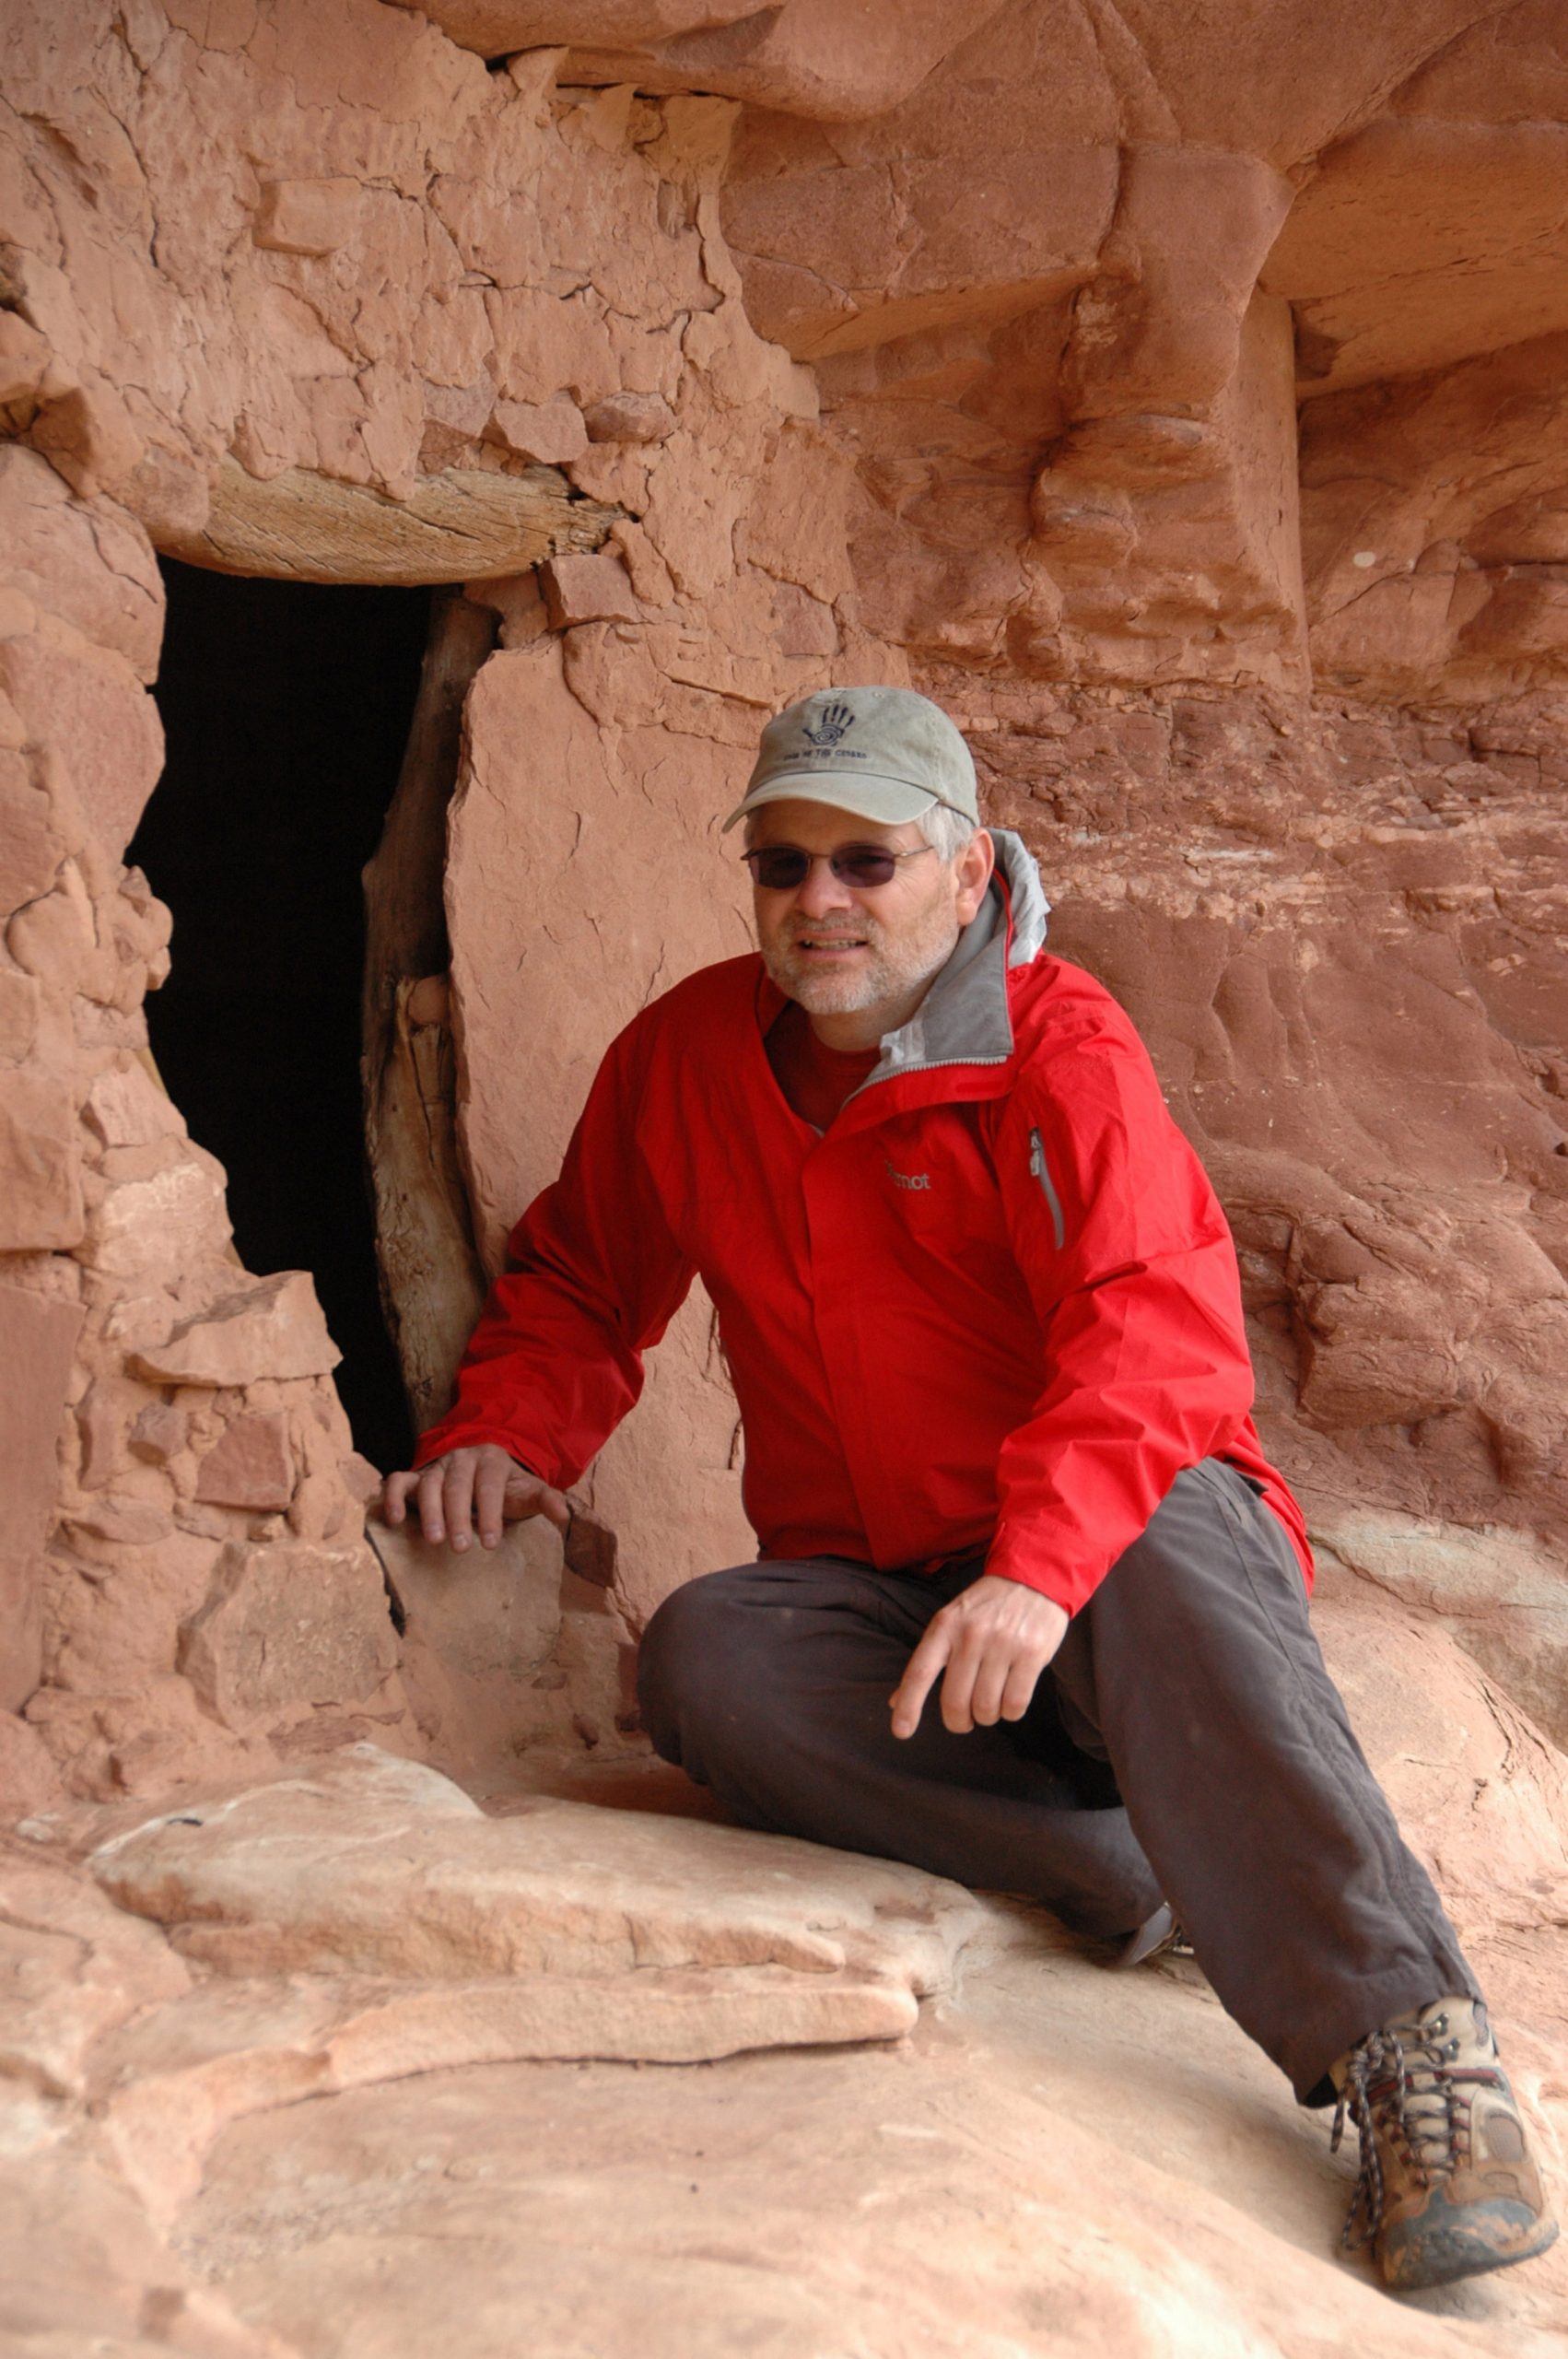 University of Utah psychology Professor David Strayer, shown here during a hiking trip in southern Utah's Grand Gulch, helped conduct a new study showing that people score better on a creativity test after spending four days backpacking in the wilderness disconnected from electronic devices.